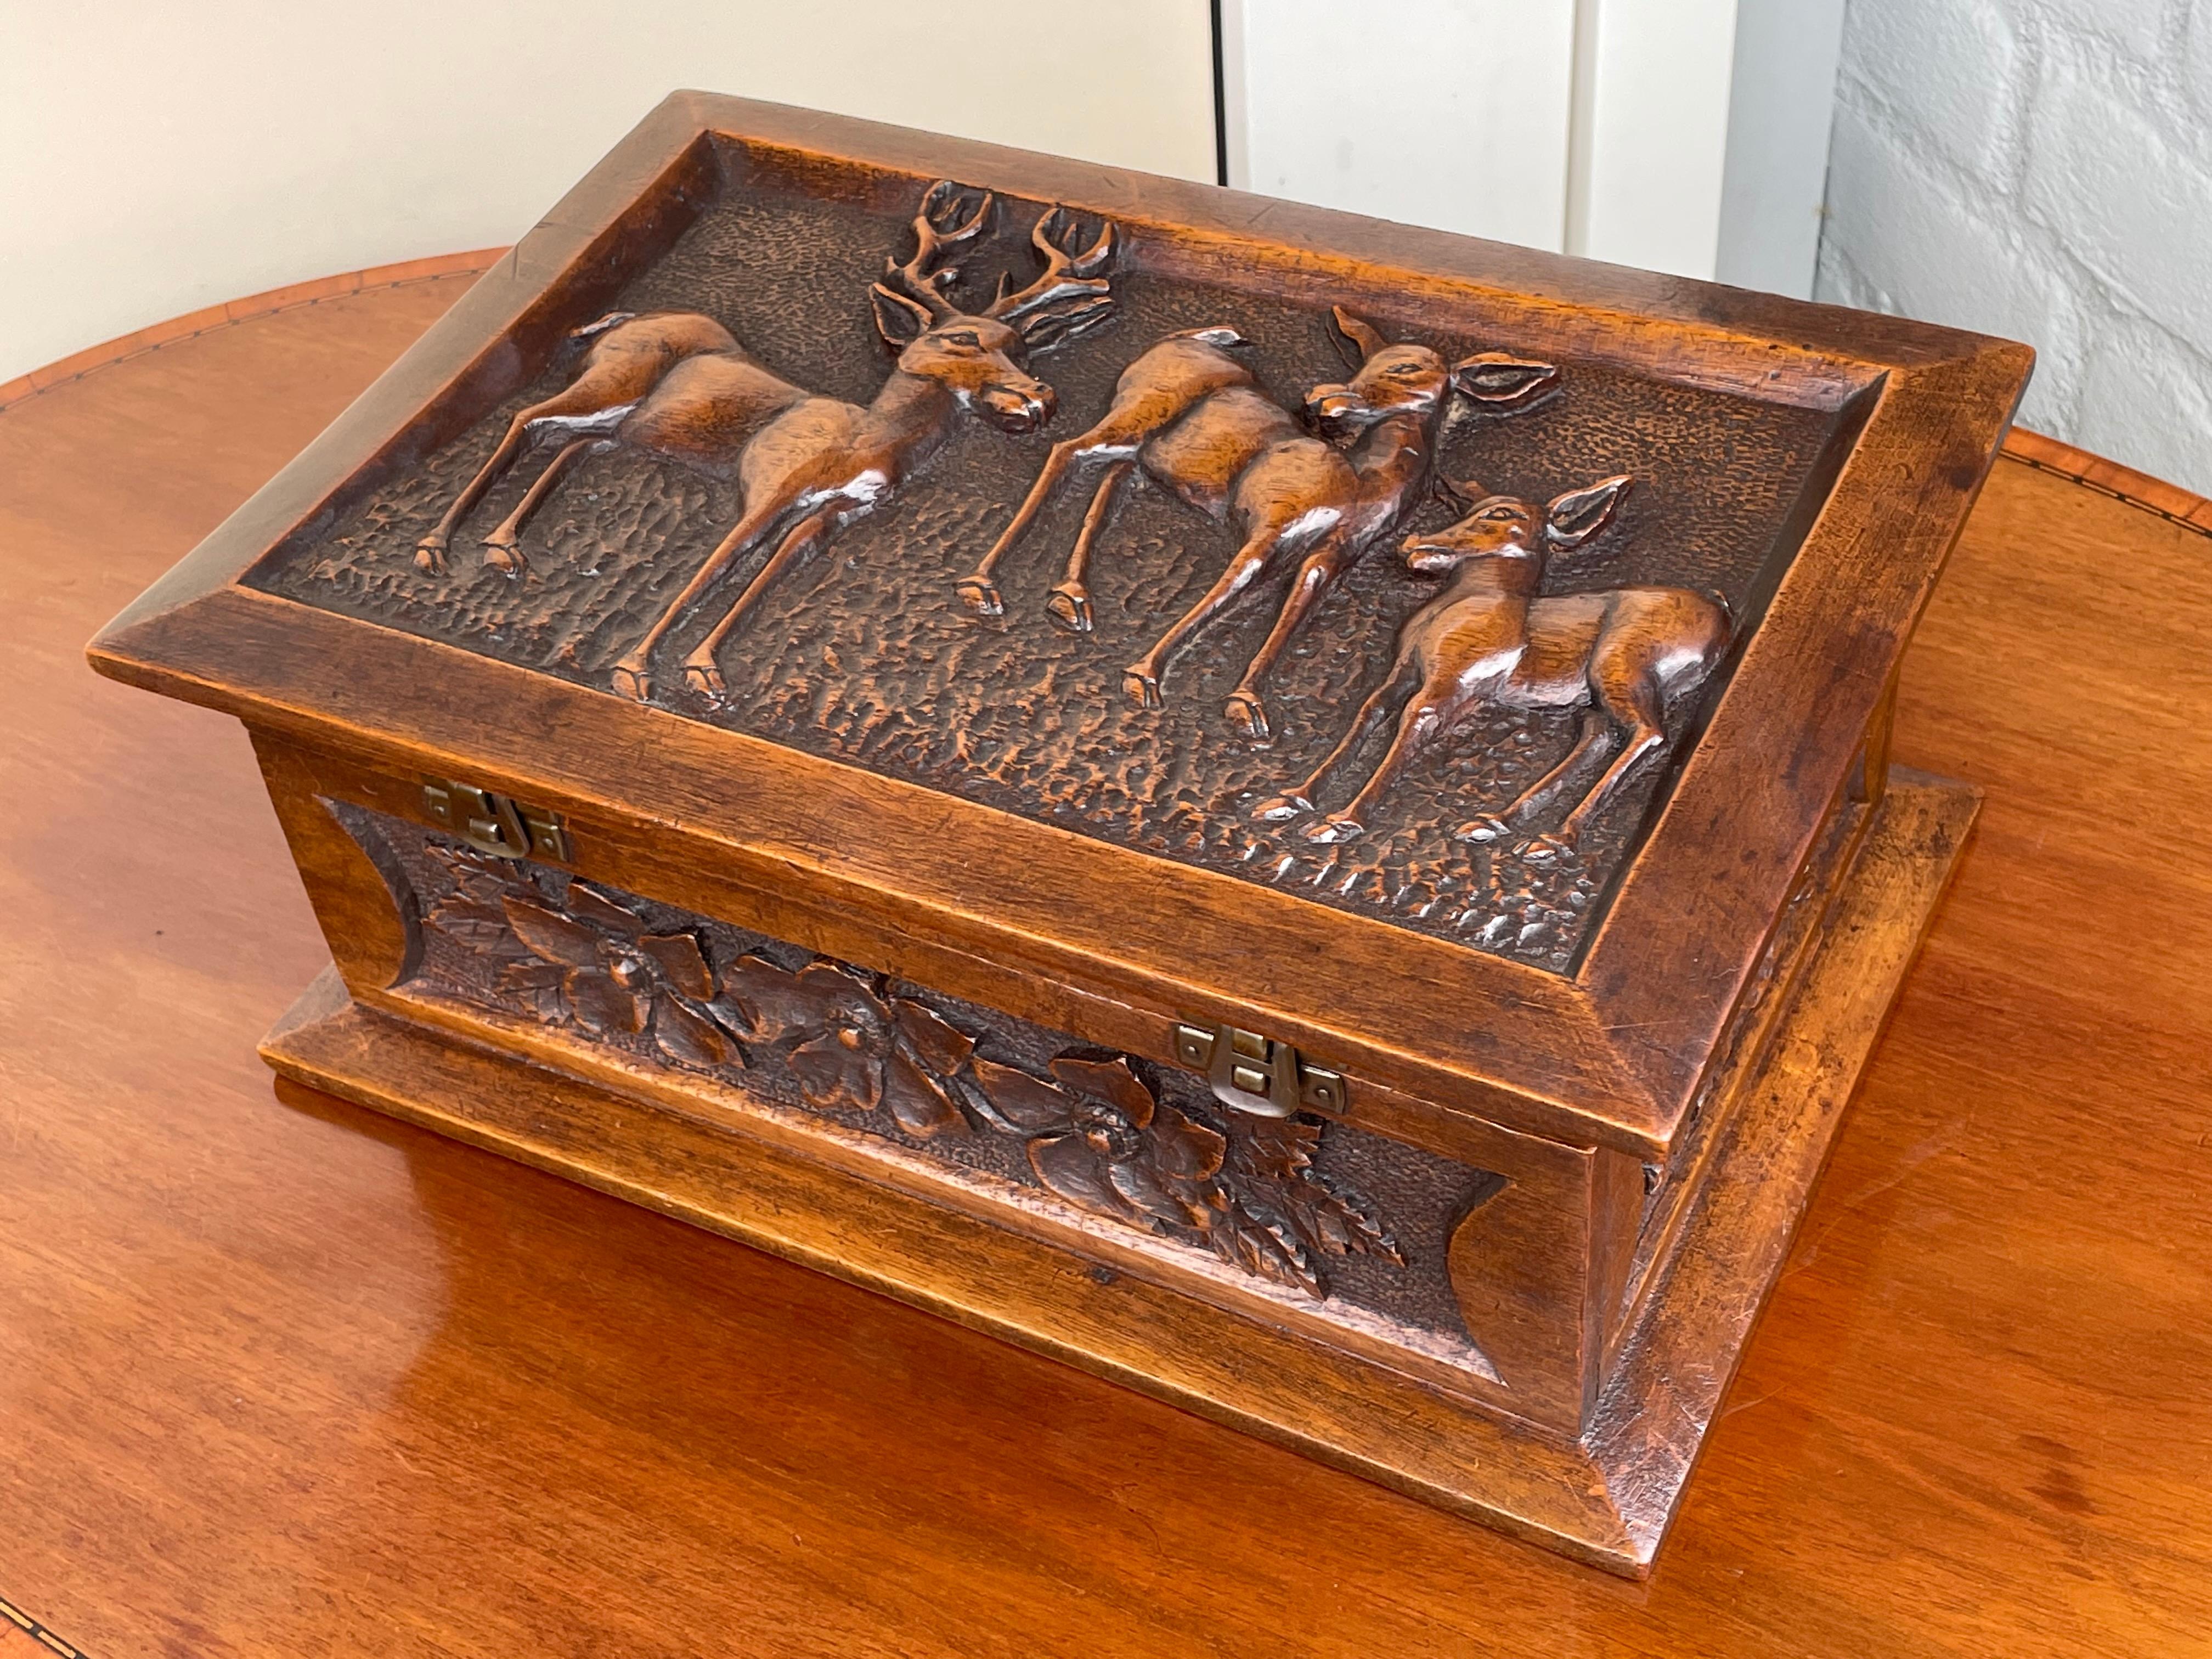 Brass Stunning Arts & Crafts Box with Hand Carved Deer Sculptures in Deep Relief, 1910